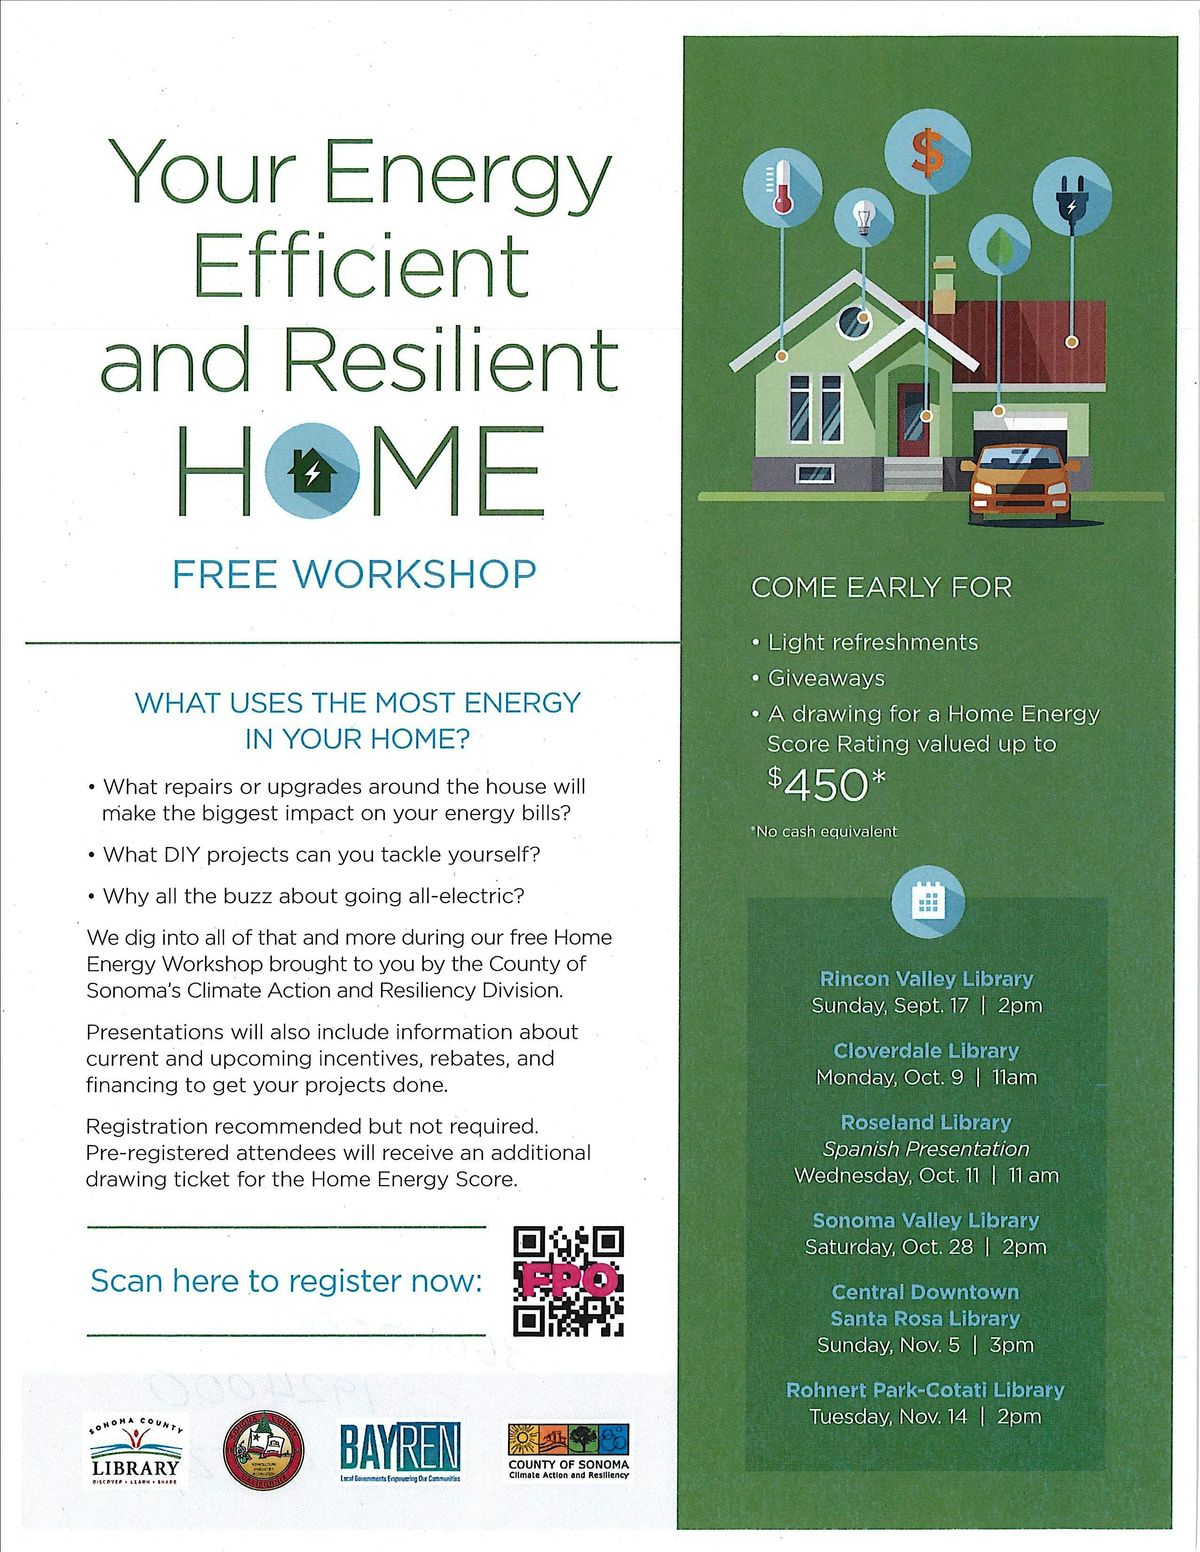 Your Energy Efficient and Resilient Home - Sebastopol